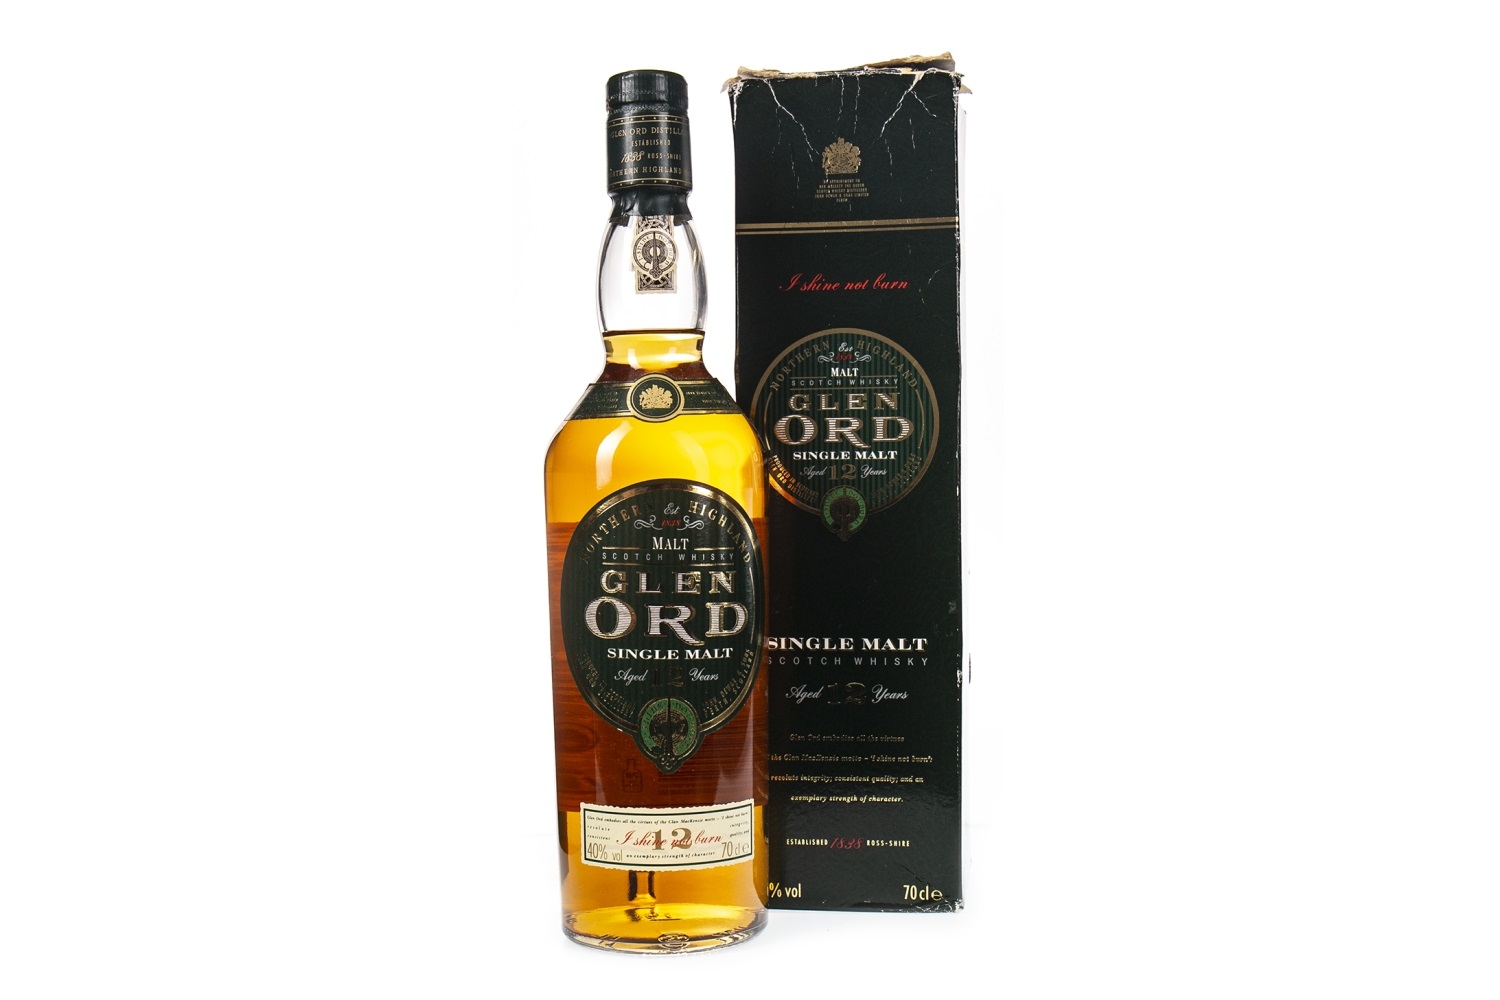 GLEN ORD 12 YEARS OLD